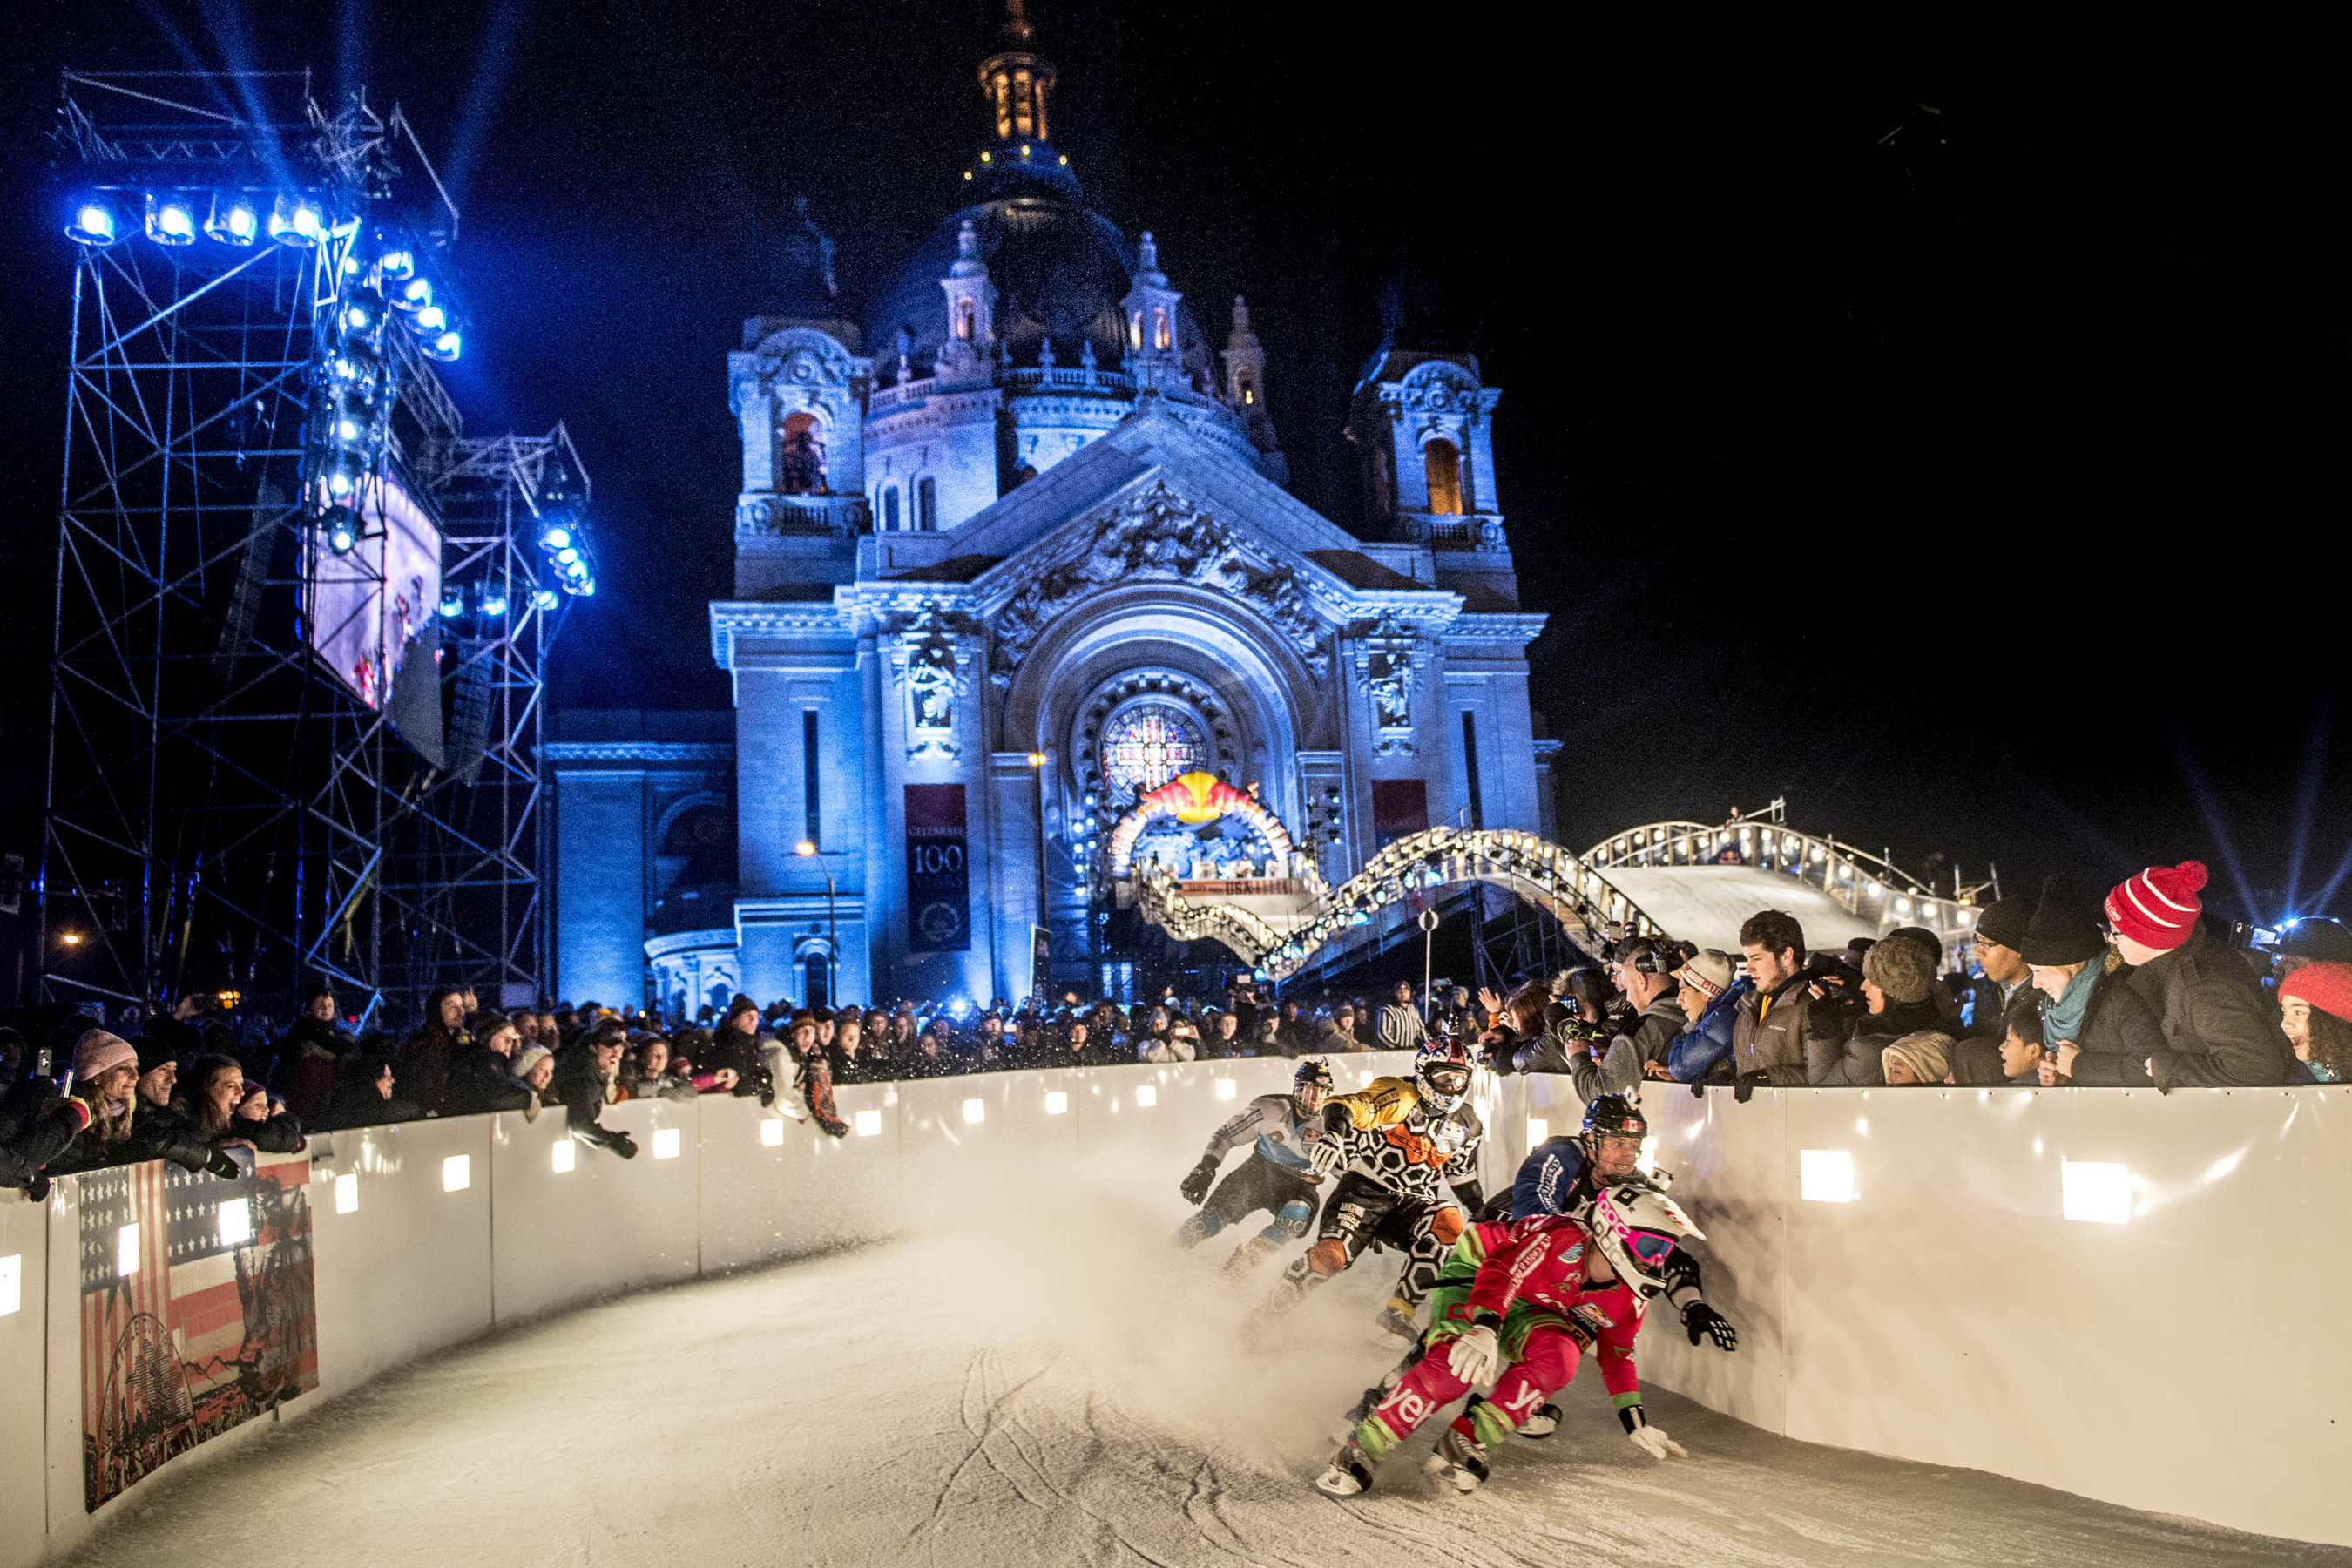 Riders fight for victory at Red Bull Crashed Ice Saint Paul 2015.